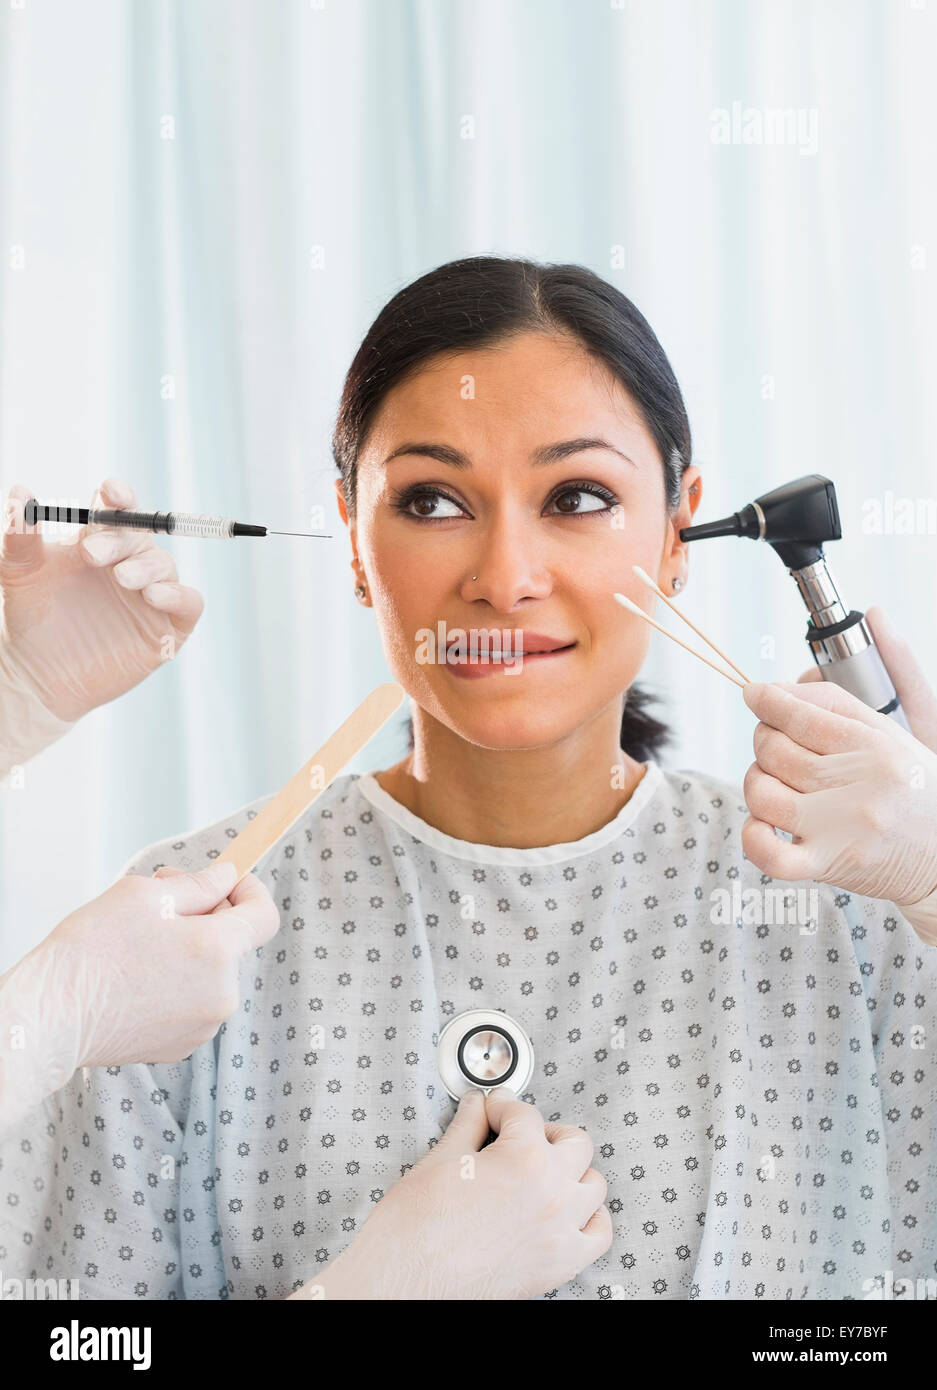 Patient being examined using medical instruments Stock Photo